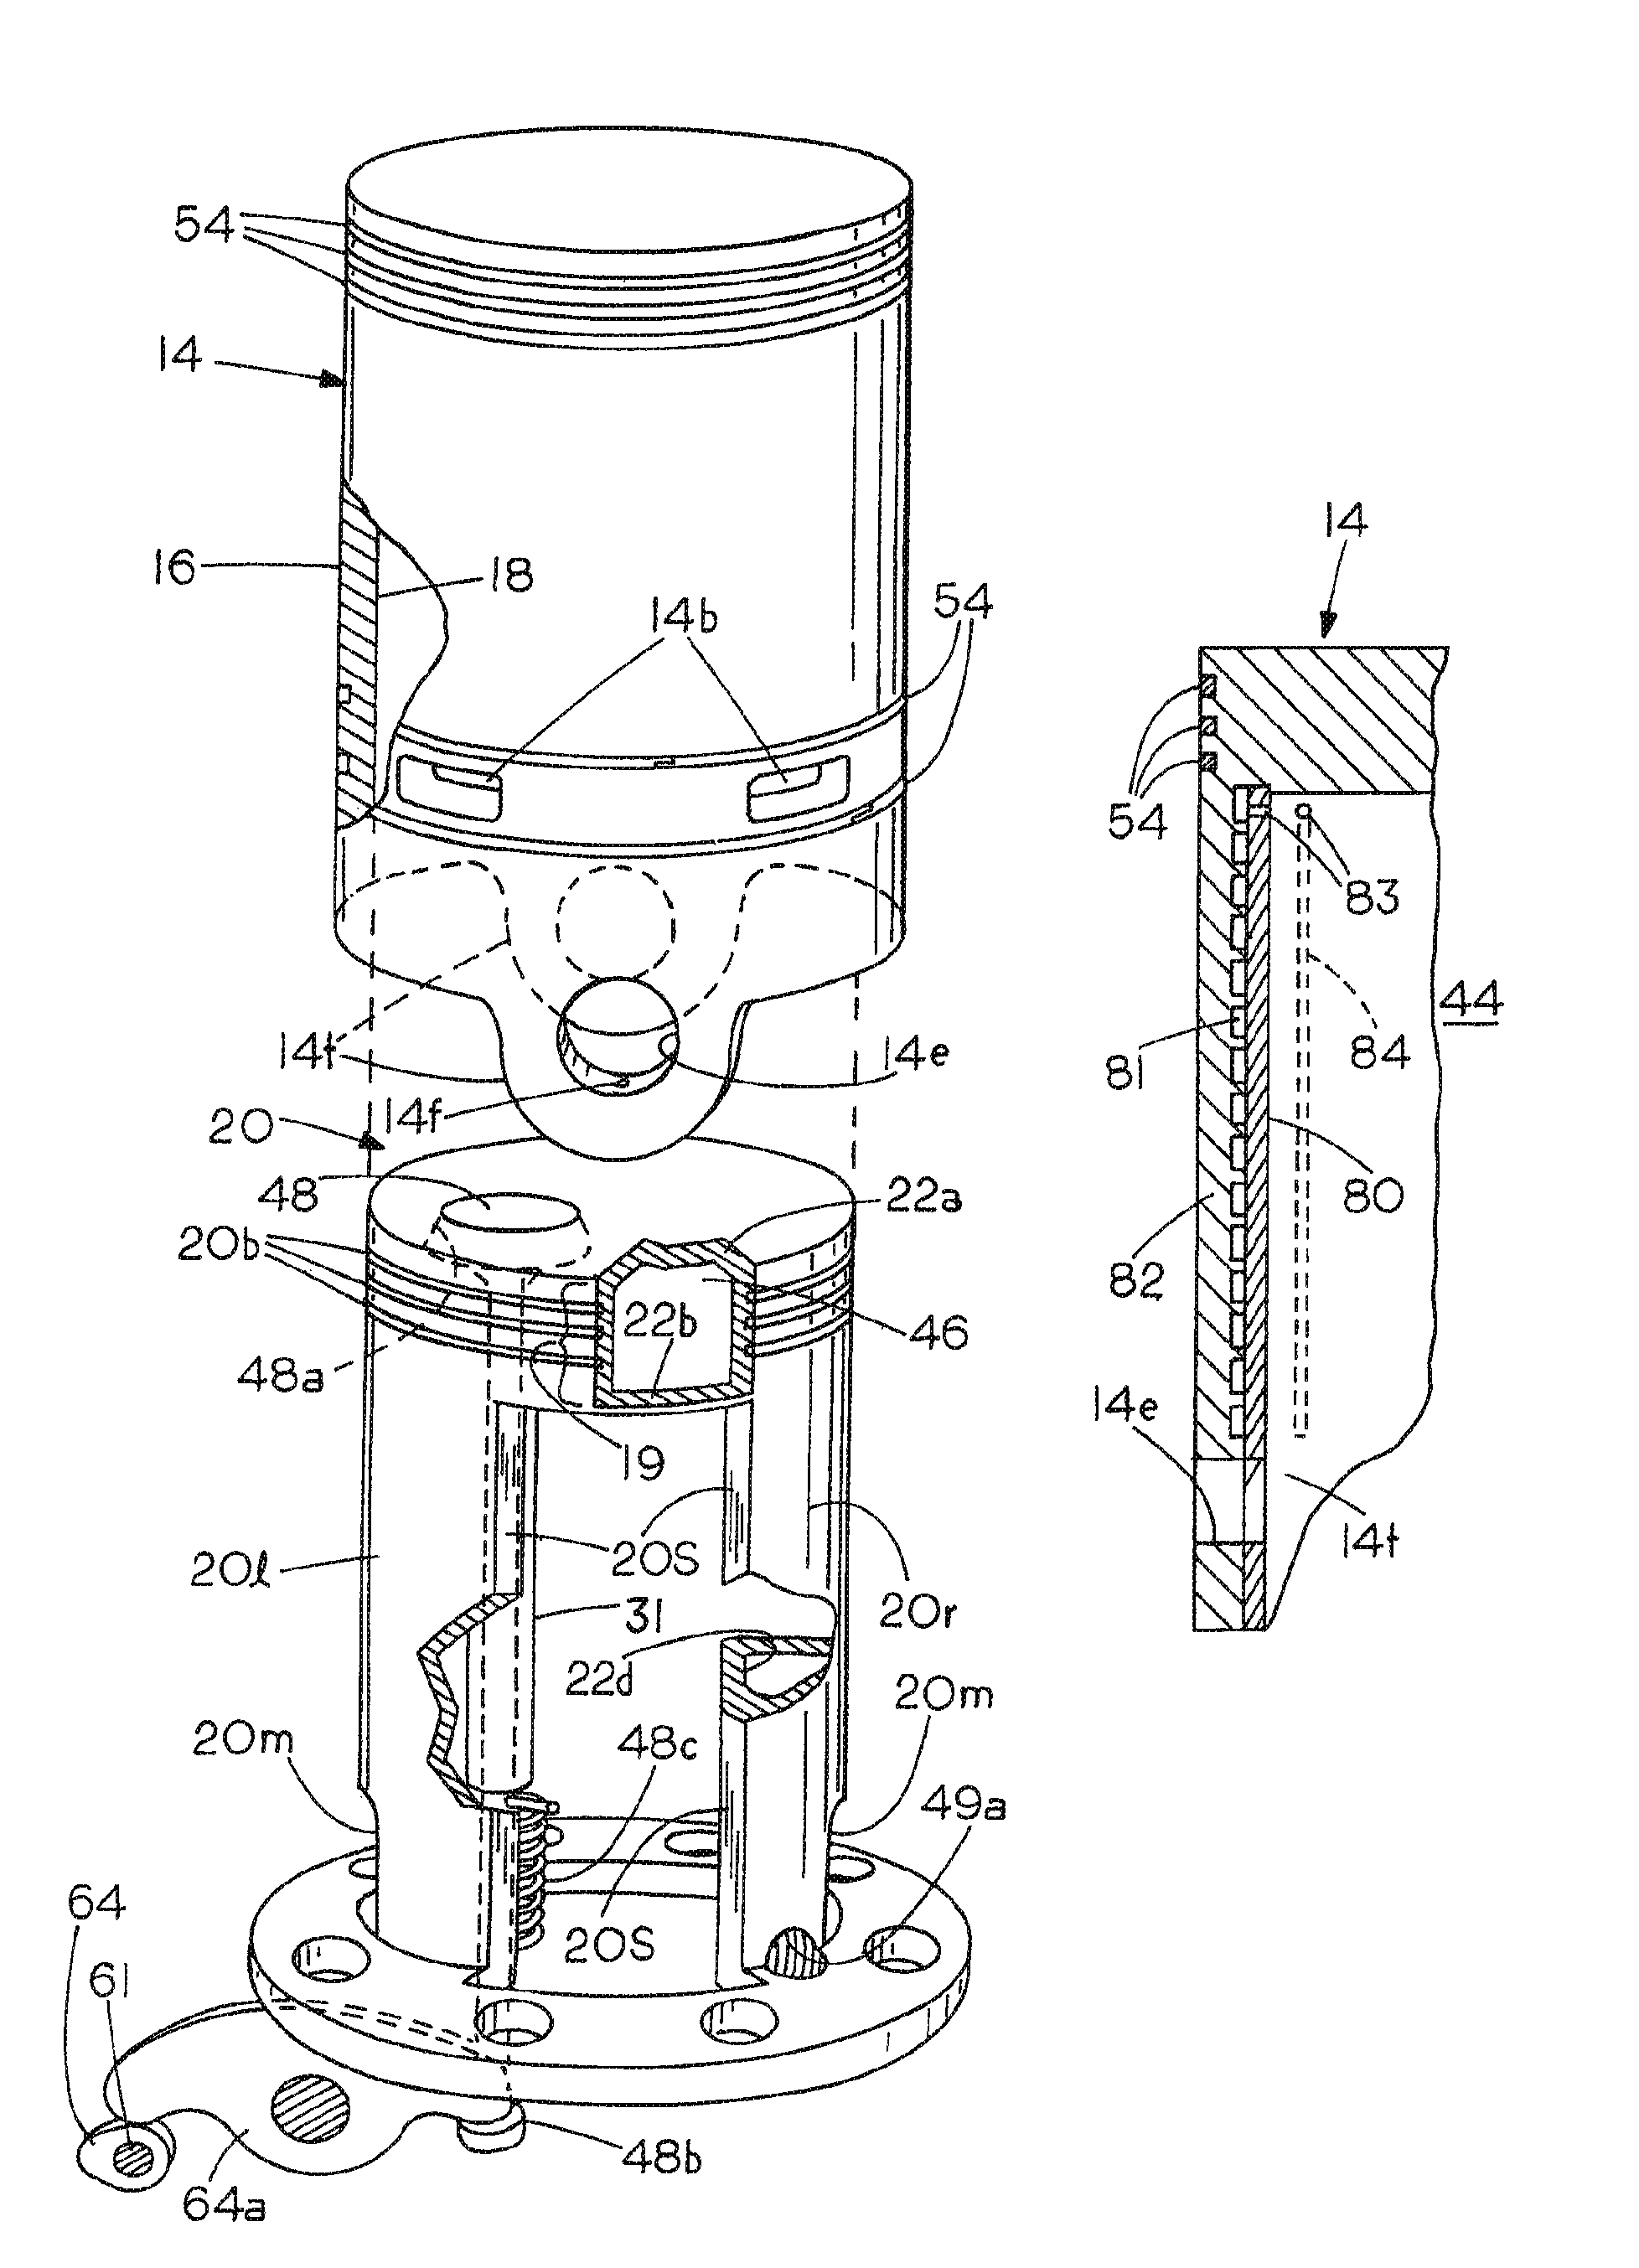 High efficiency multicycle internal combustion engine with waste heat recovery